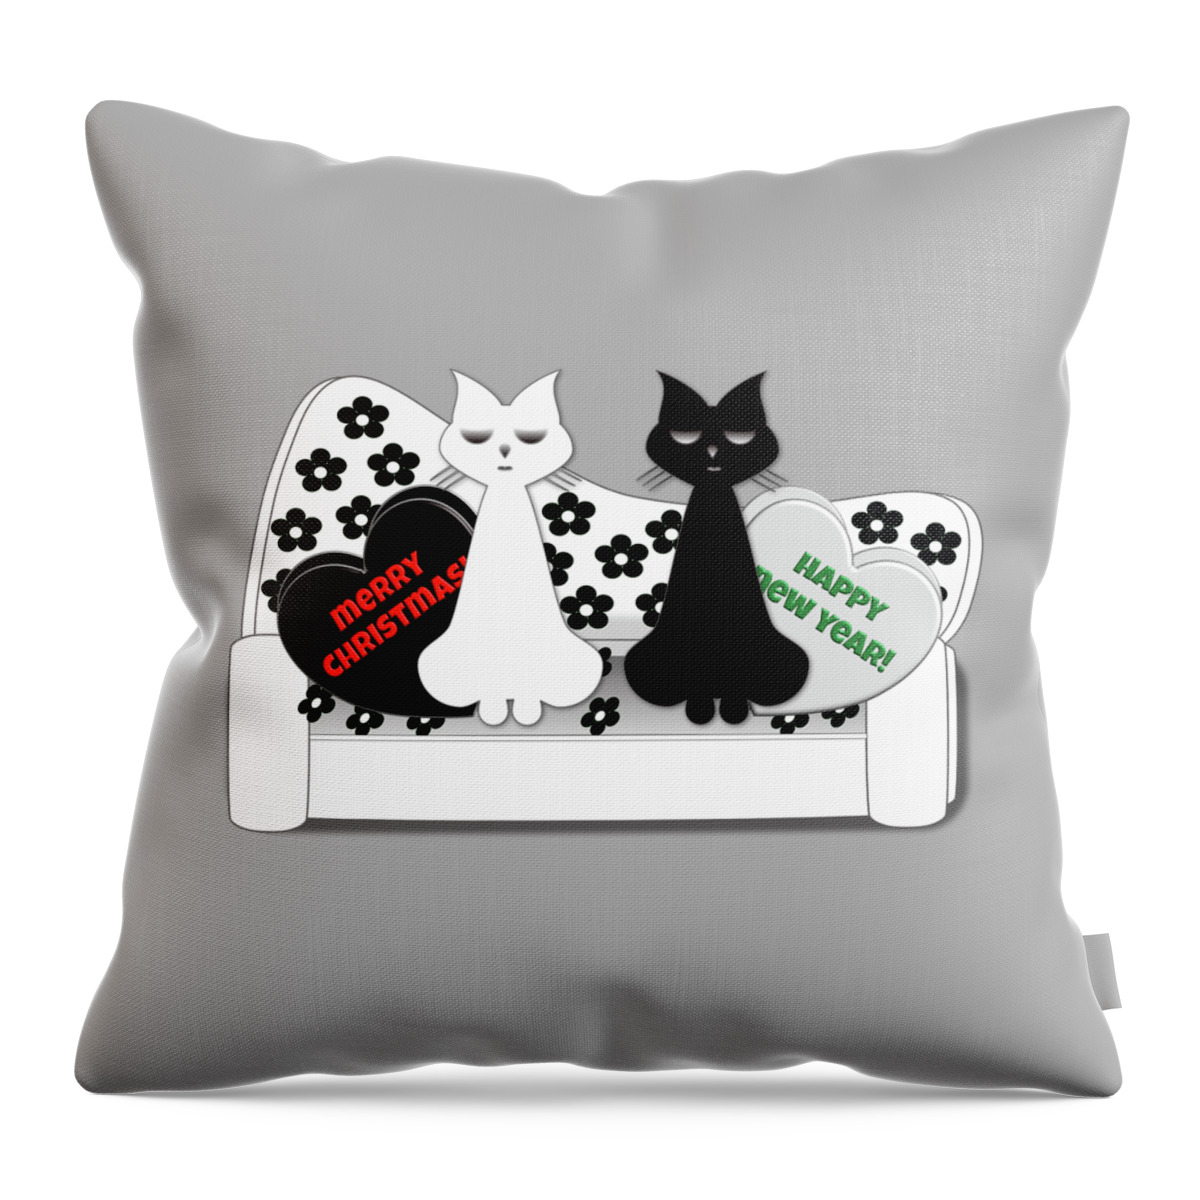 Christmas Throw Pillow featuring the digital art Christmas Cats Black and White Cartoon by Barefoot Bodeez Art